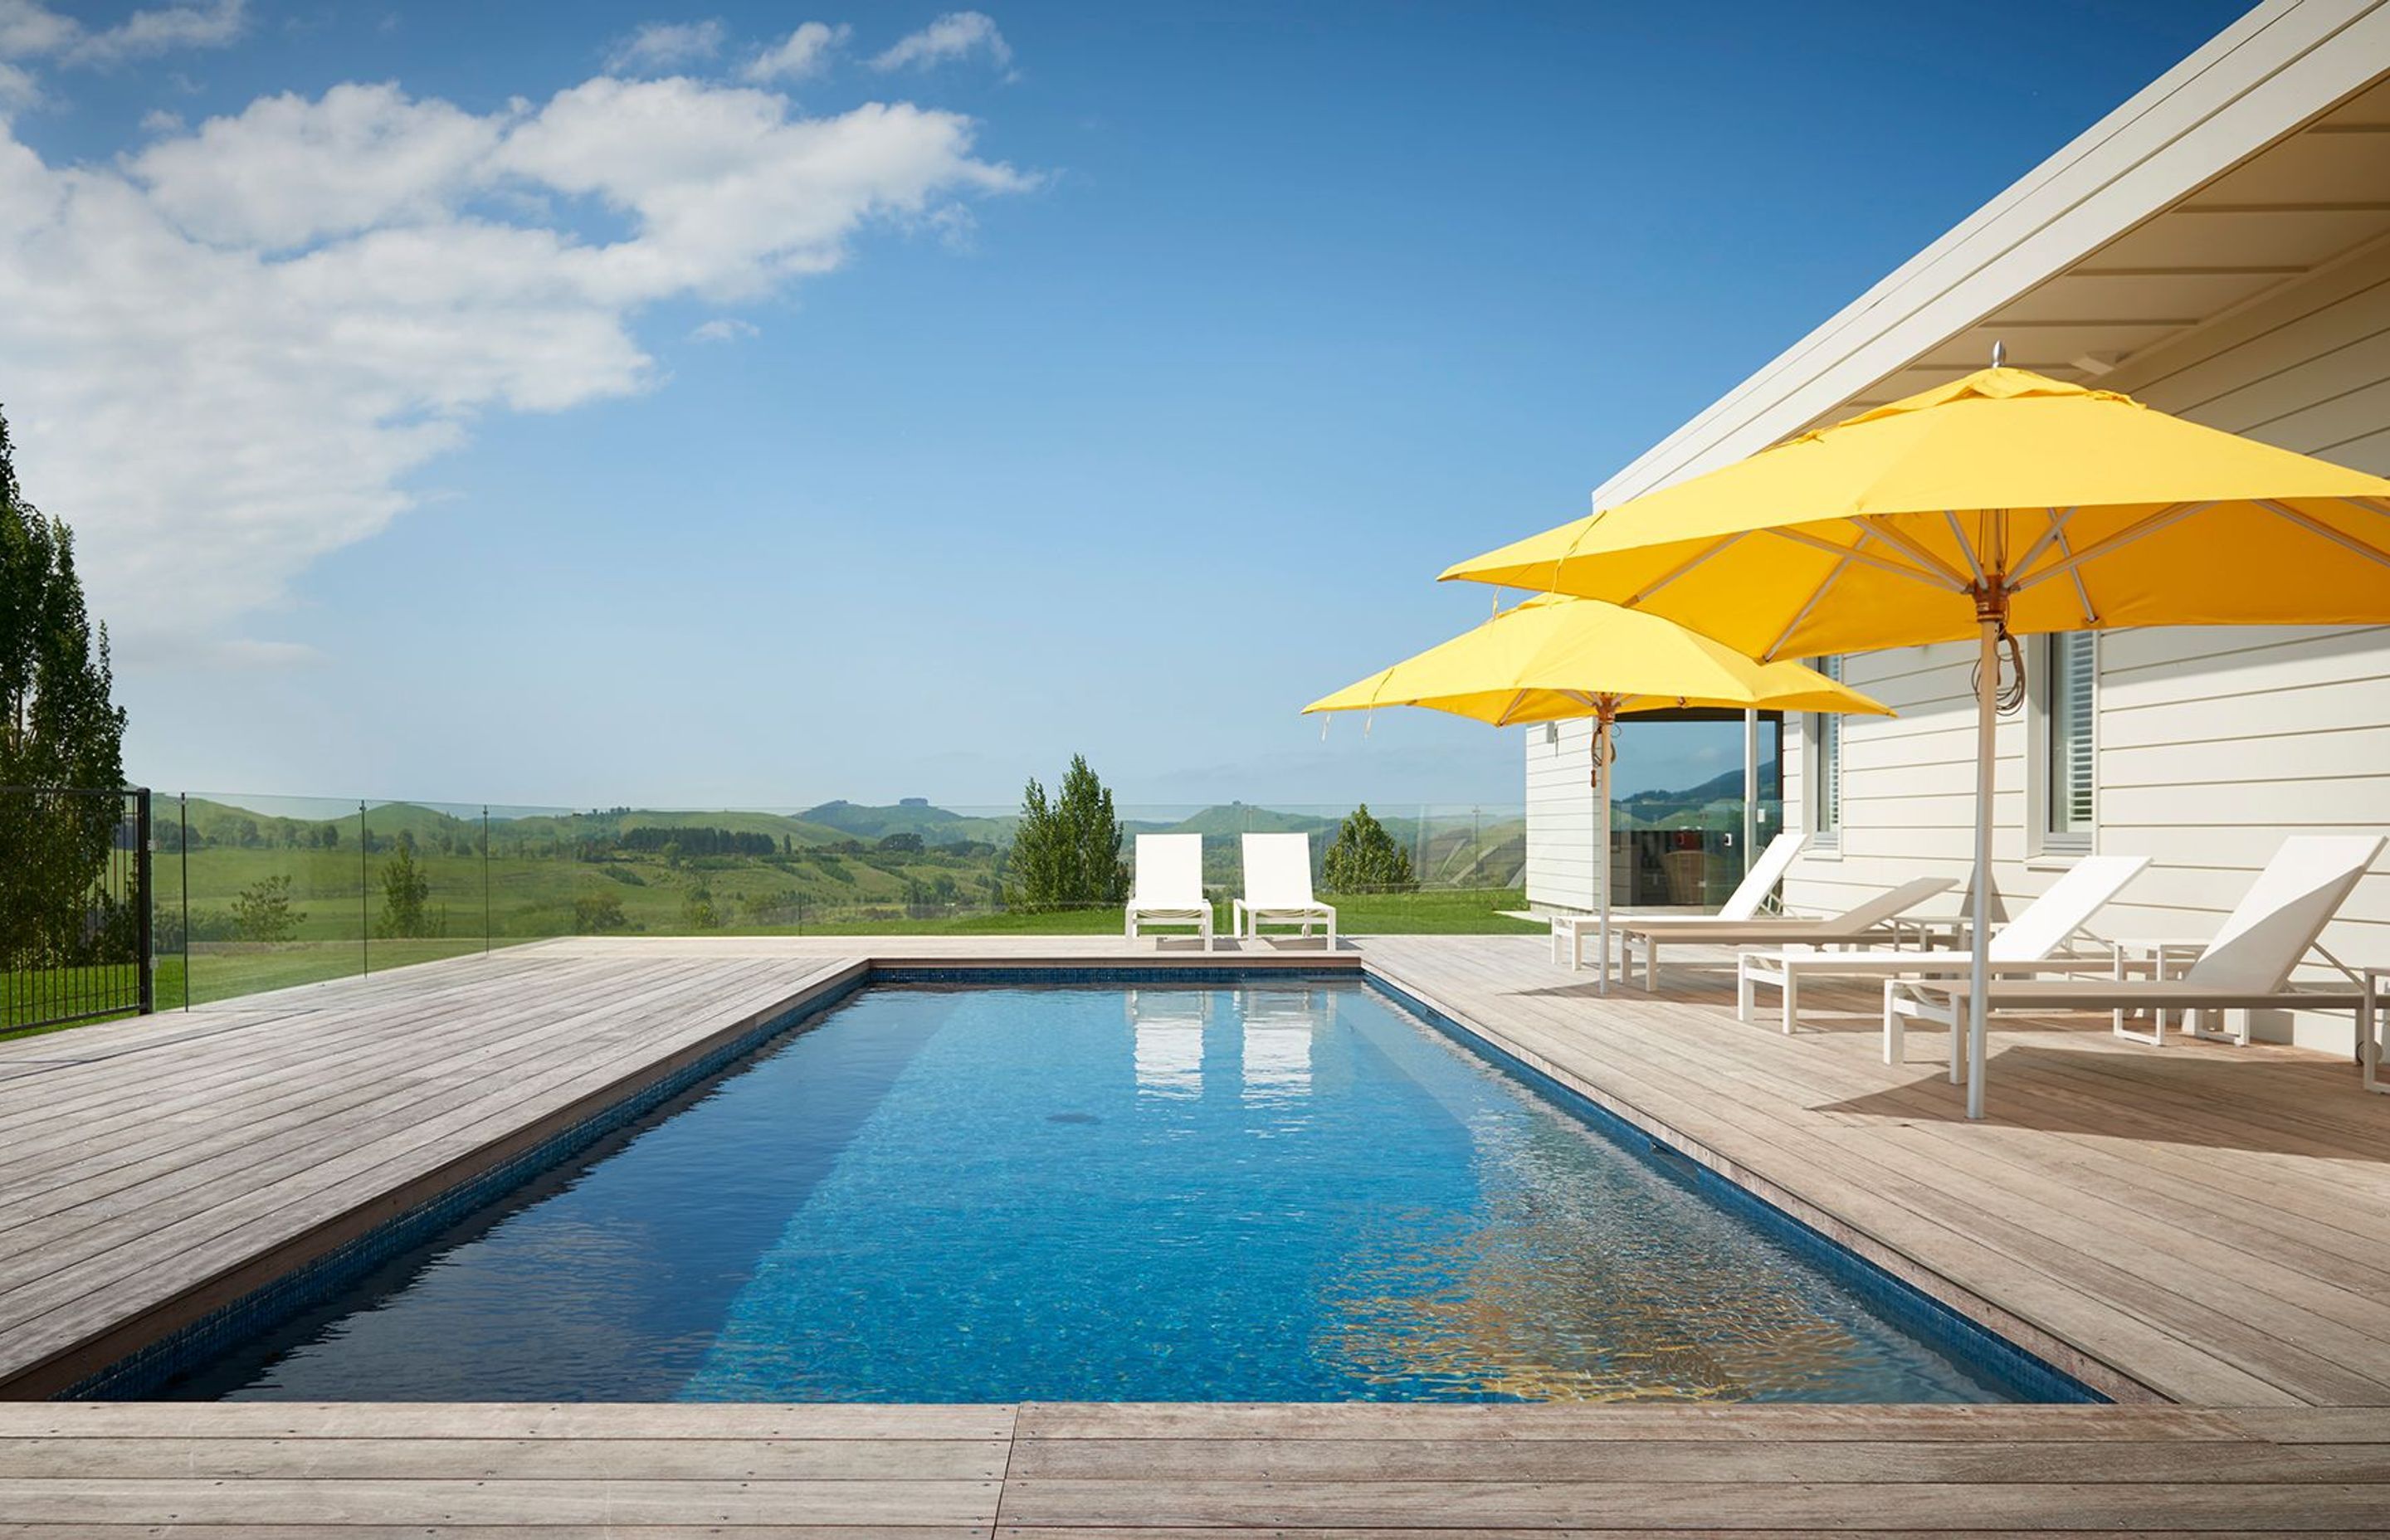 The pool area is surrounded by glass balustrades to enhance the views of the landscape.